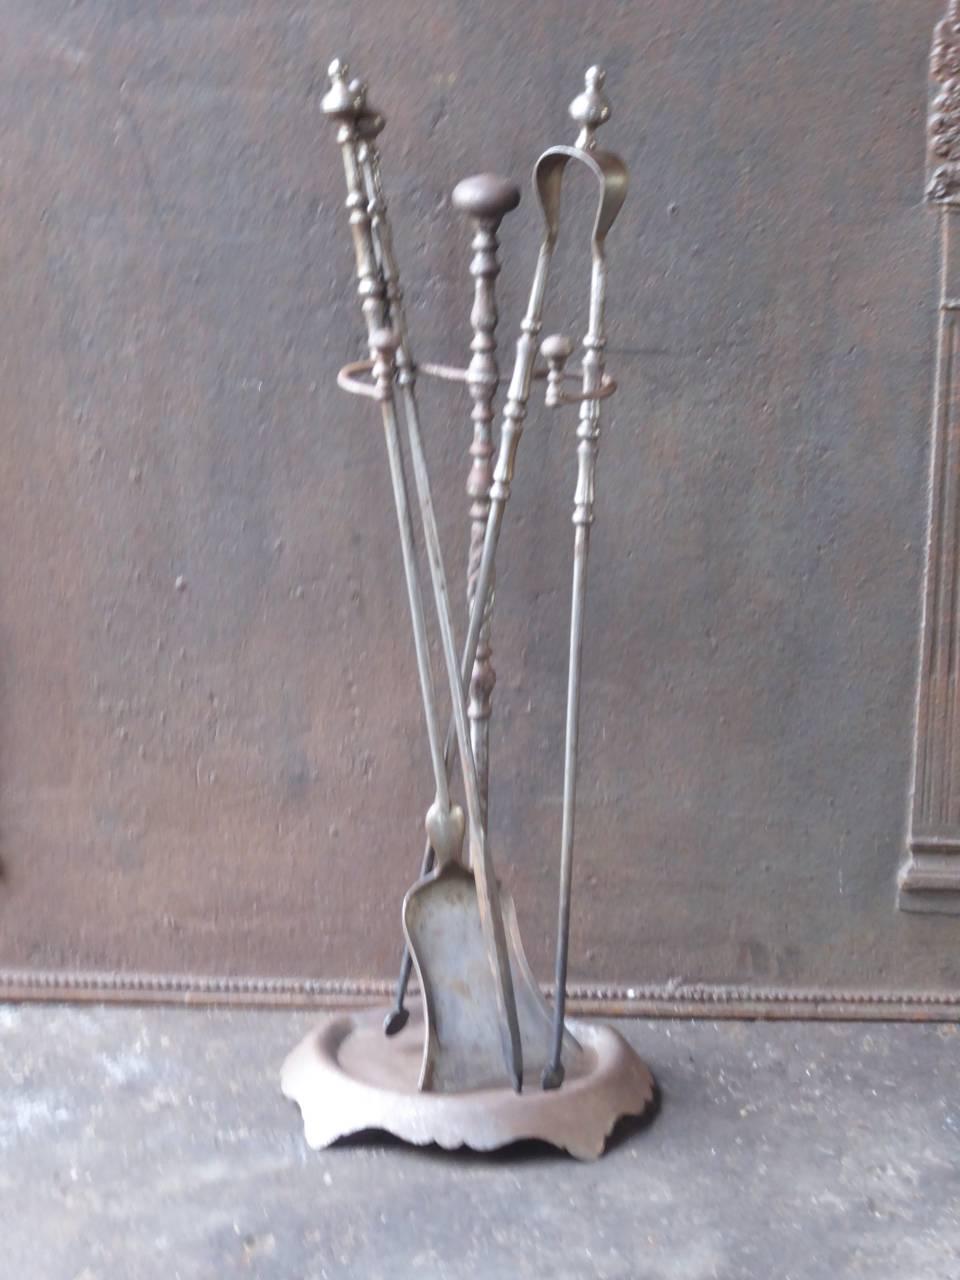 19th century French fireplace tools made of wrought iron.